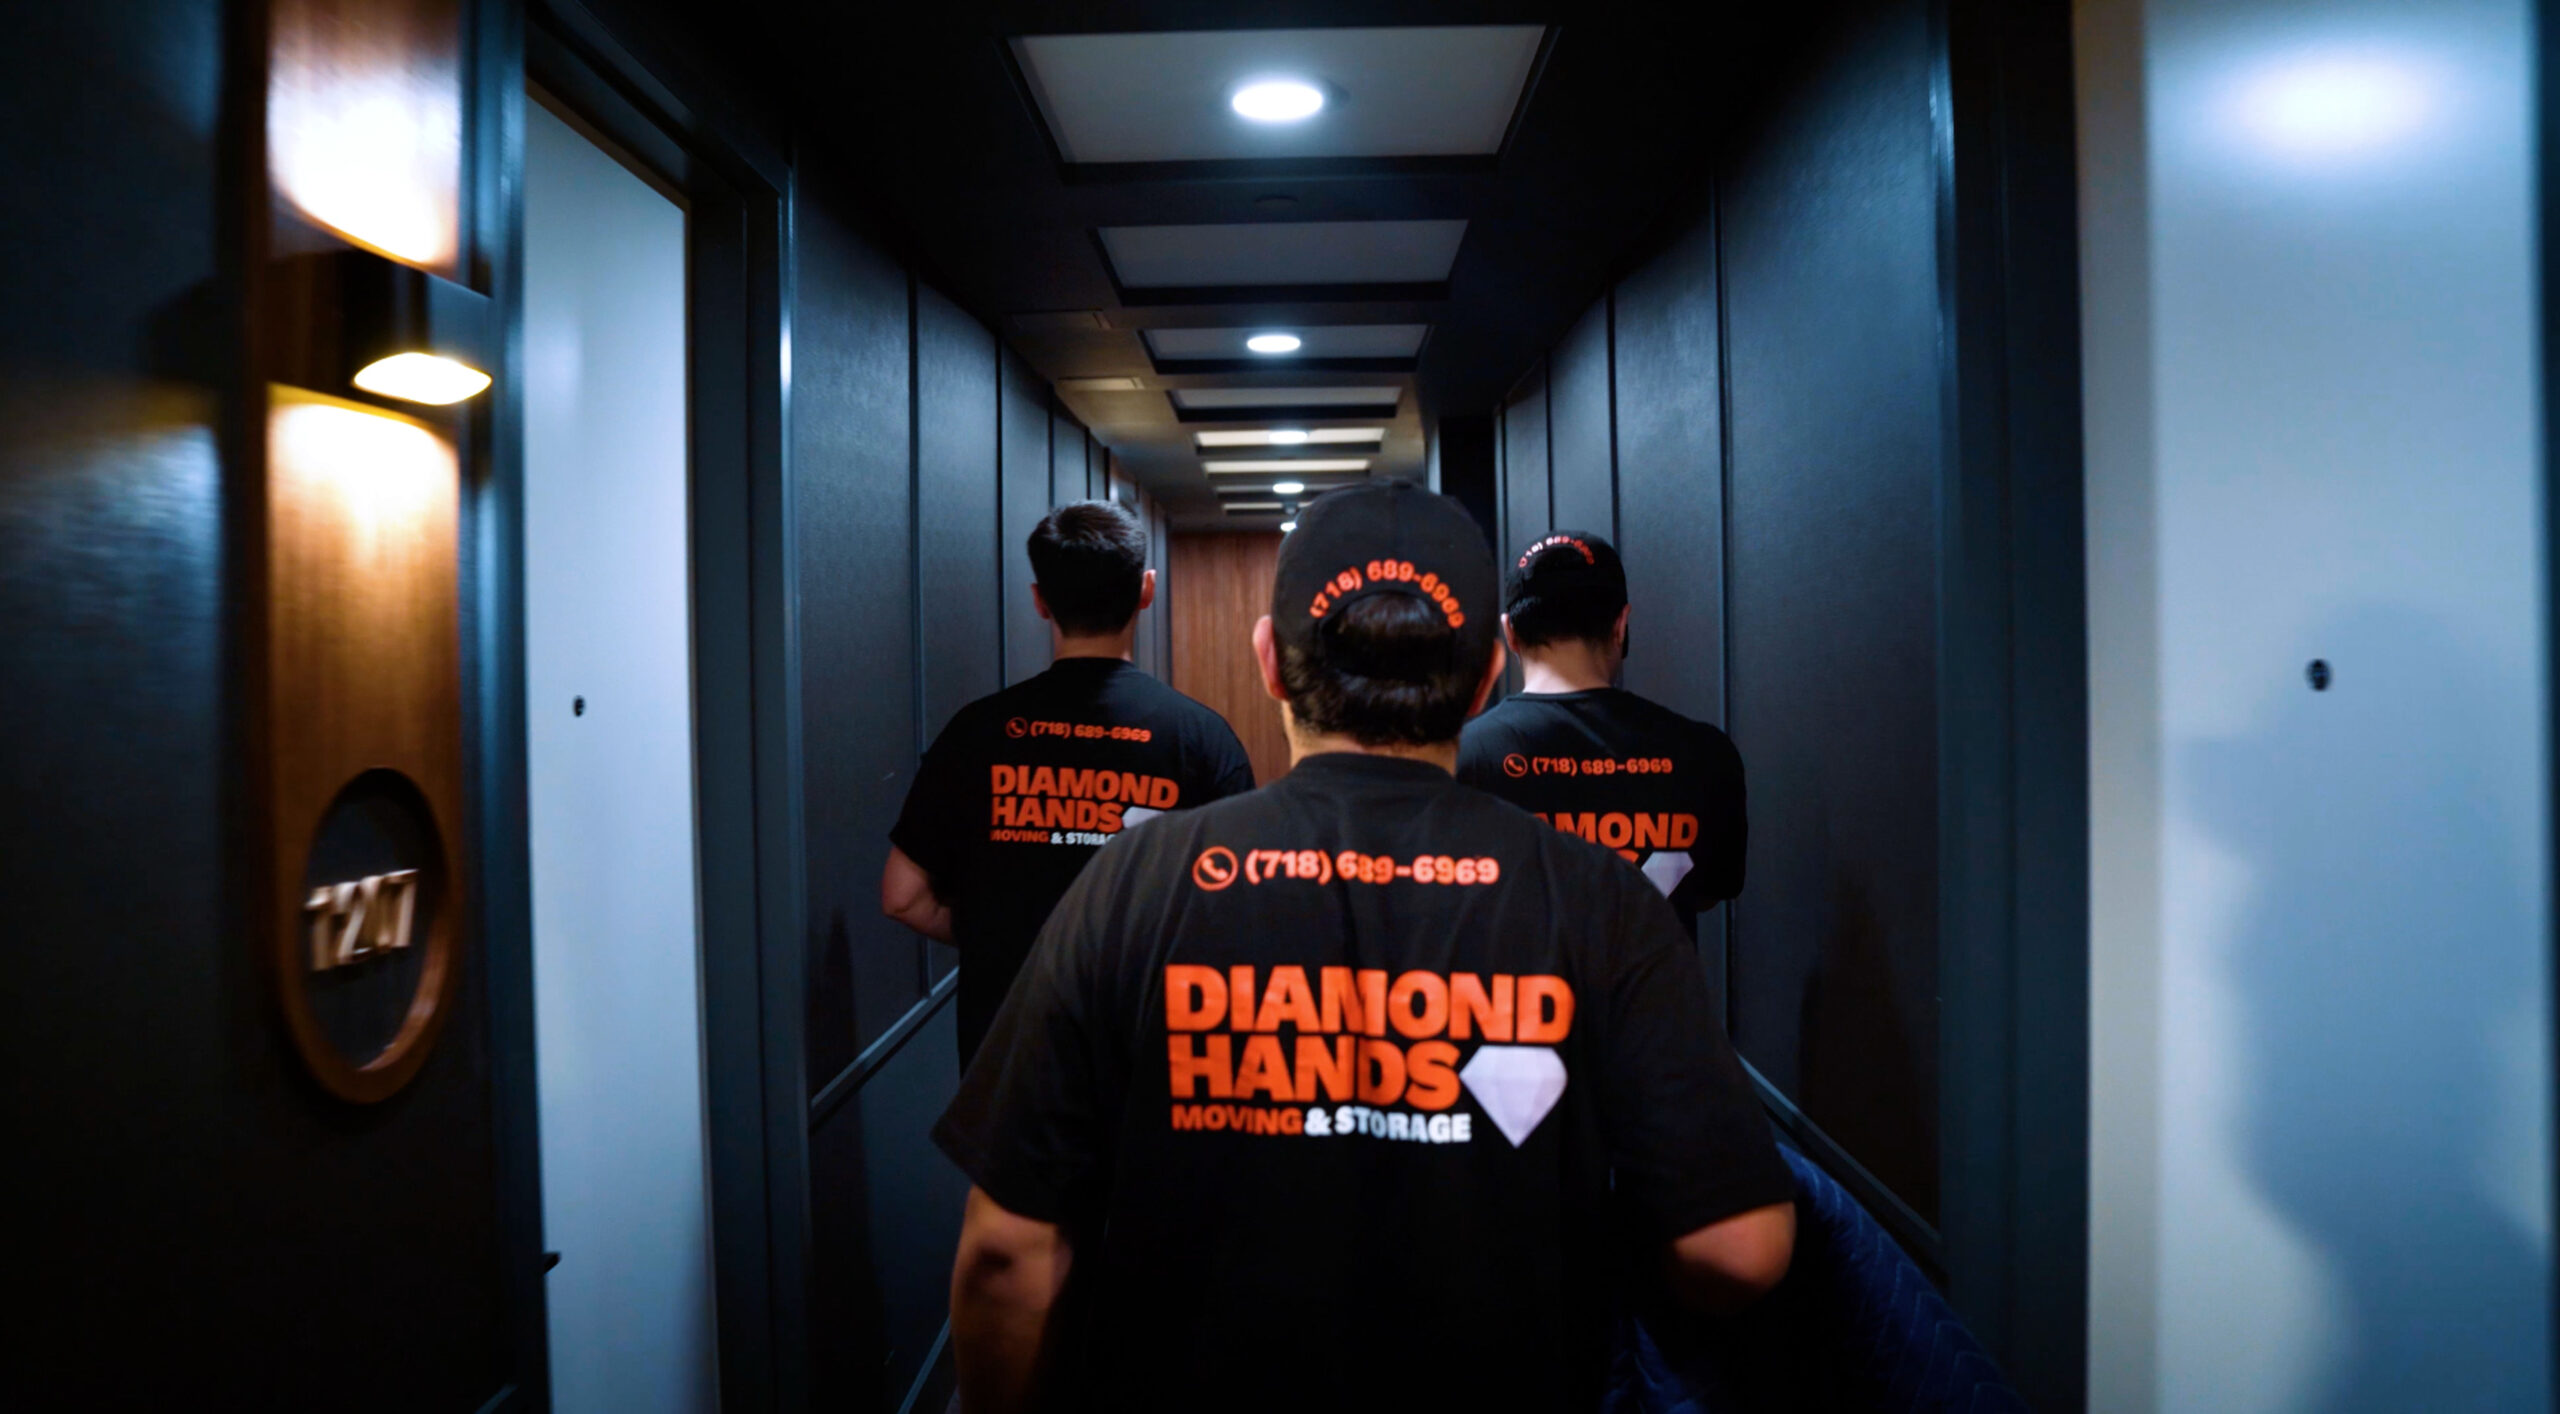 Diamond hands moving and storage NYC